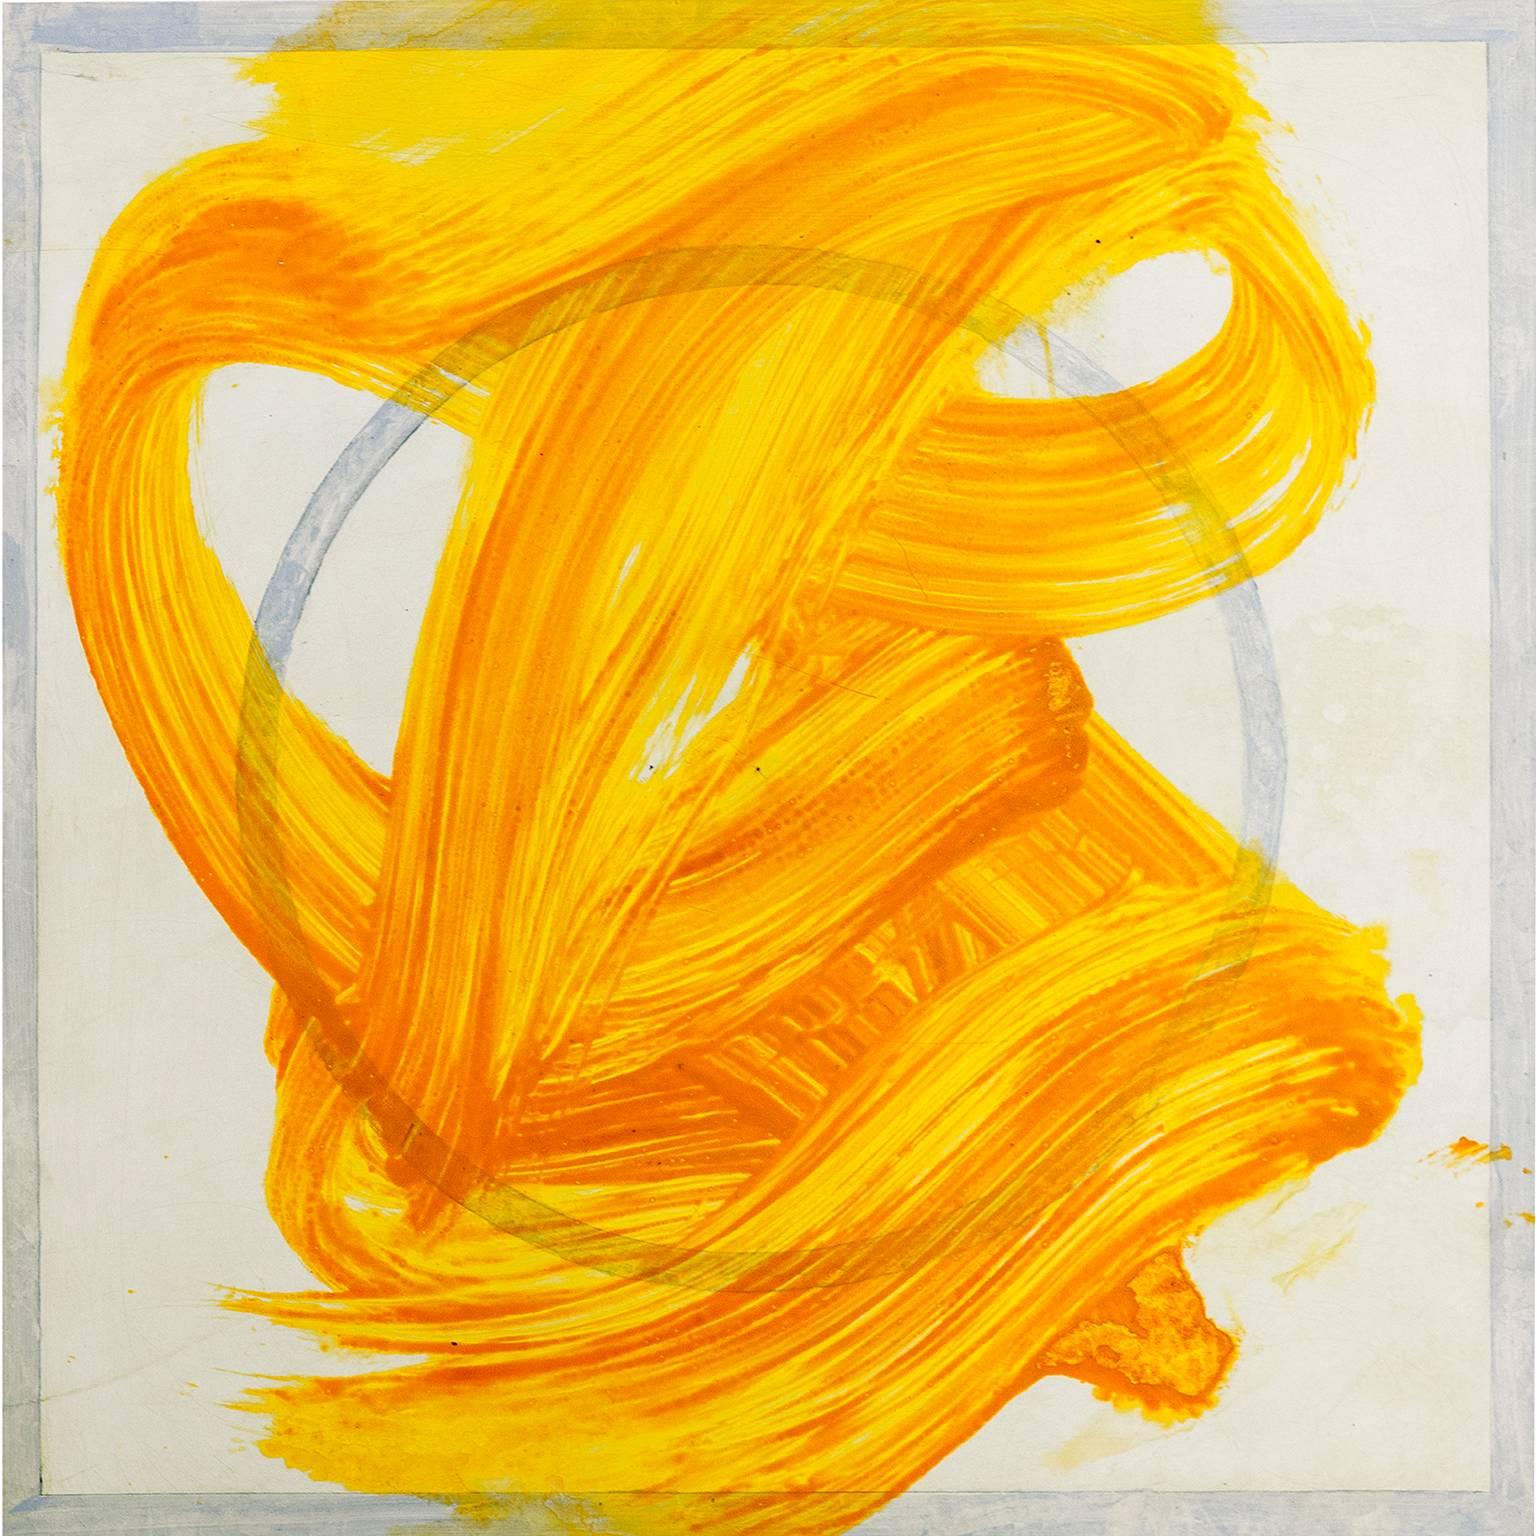 "REO 2", expressionistic painting on paper, geometric, yellow orange, blue grey. - Art by Joseph Haske